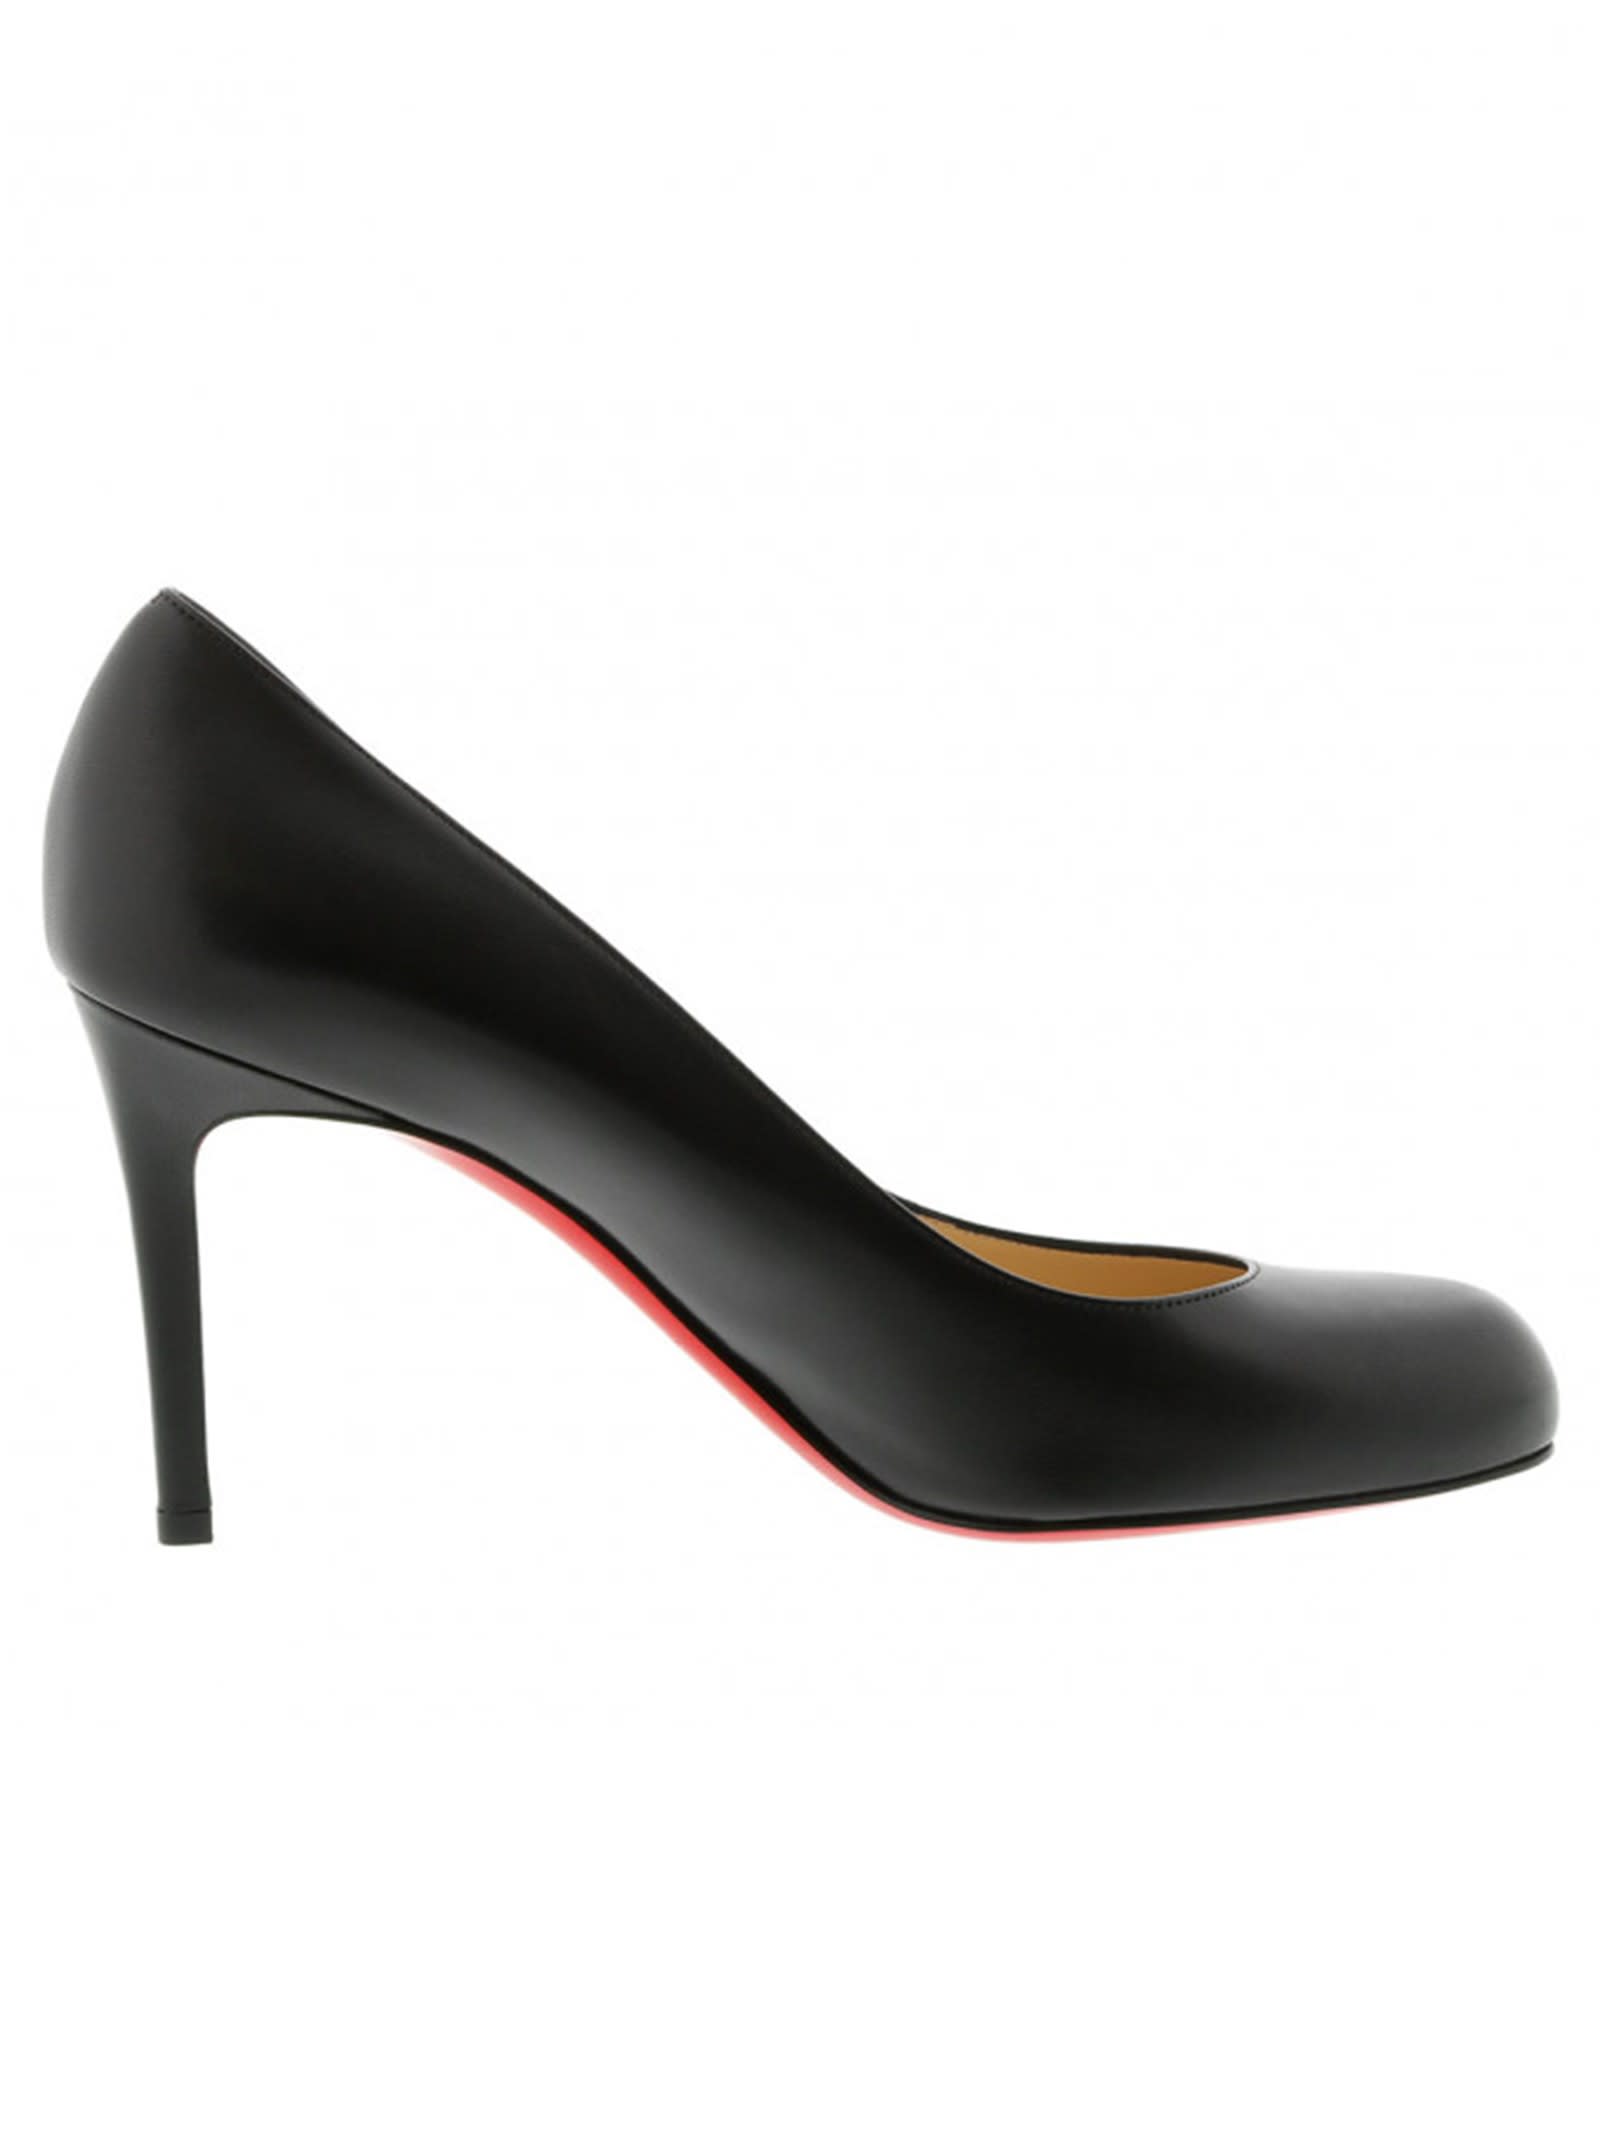 Buy Christian Louboutin Black Leather Simple Pumps online, shop Christian Louboutin shoes with free shipping